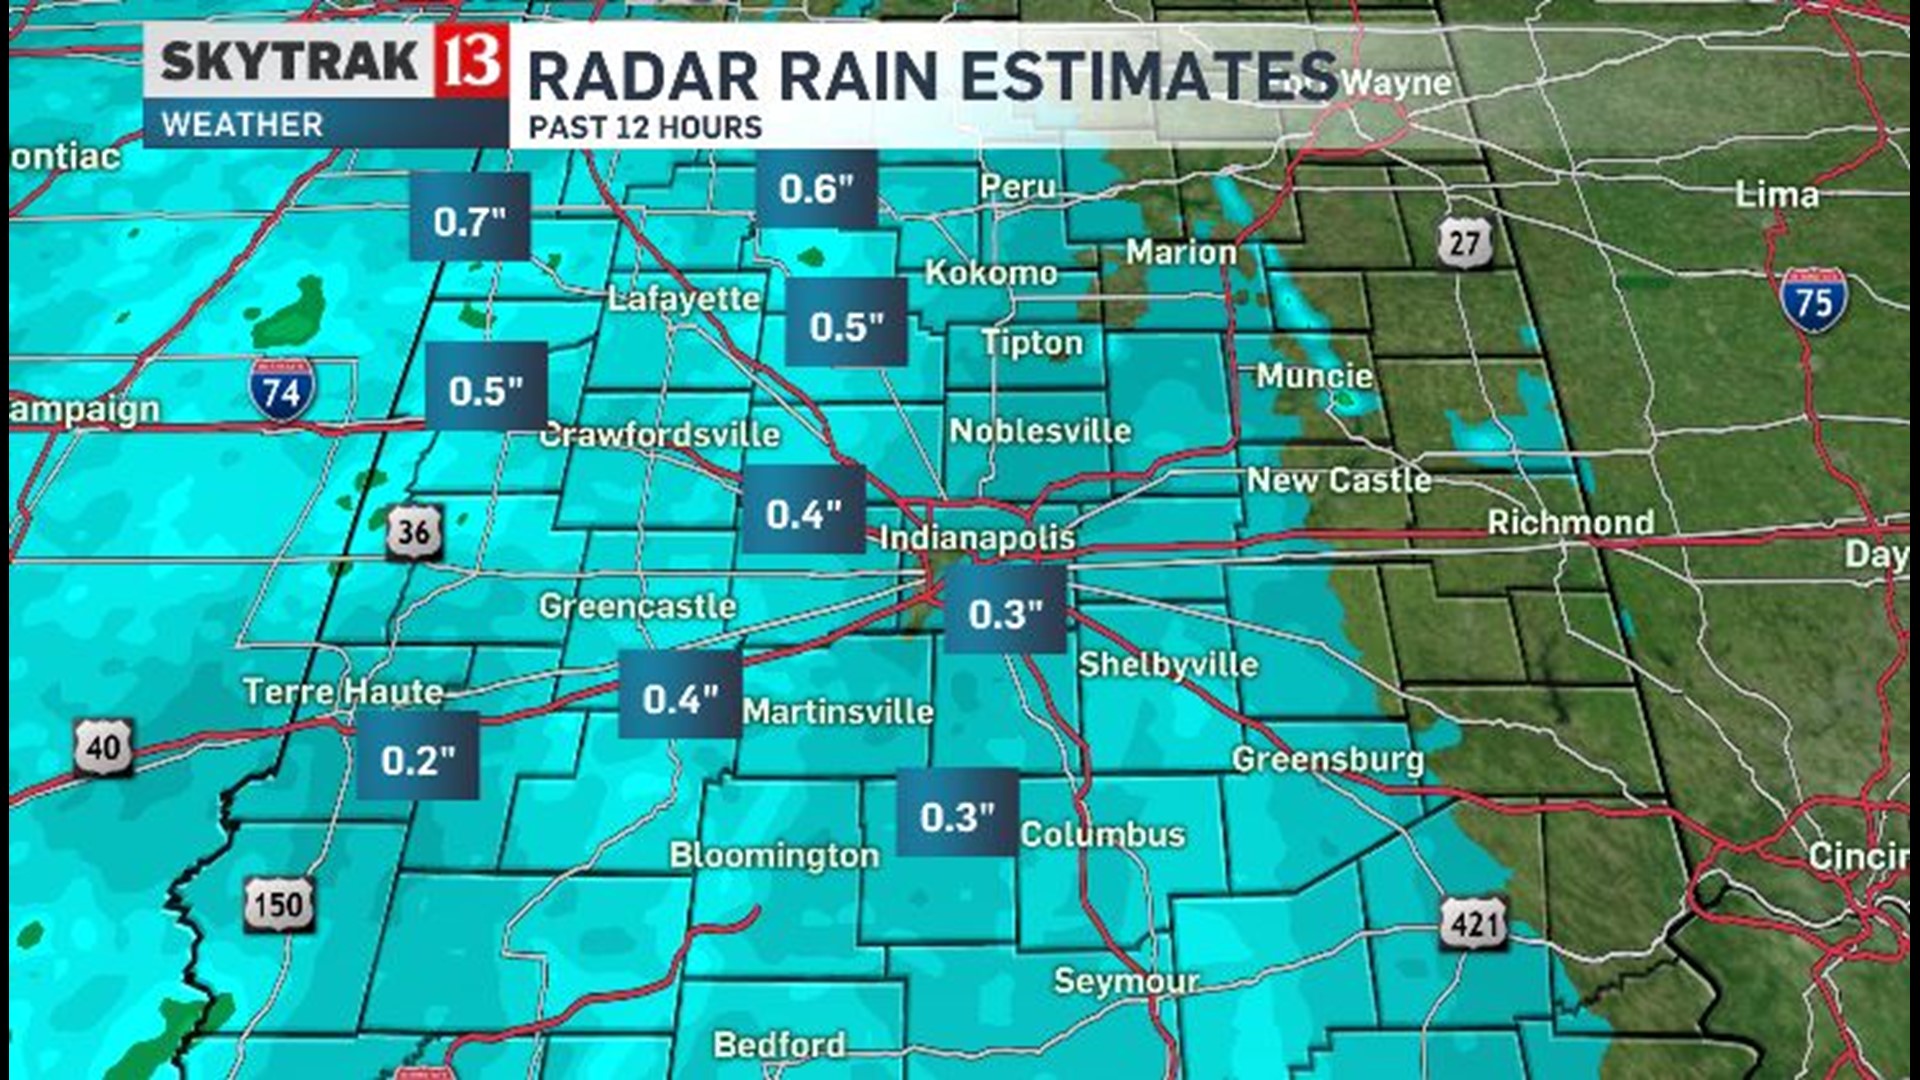 Rain Totals So Far and When It Ends SkyTrak13 Weather Blog 1/19/17